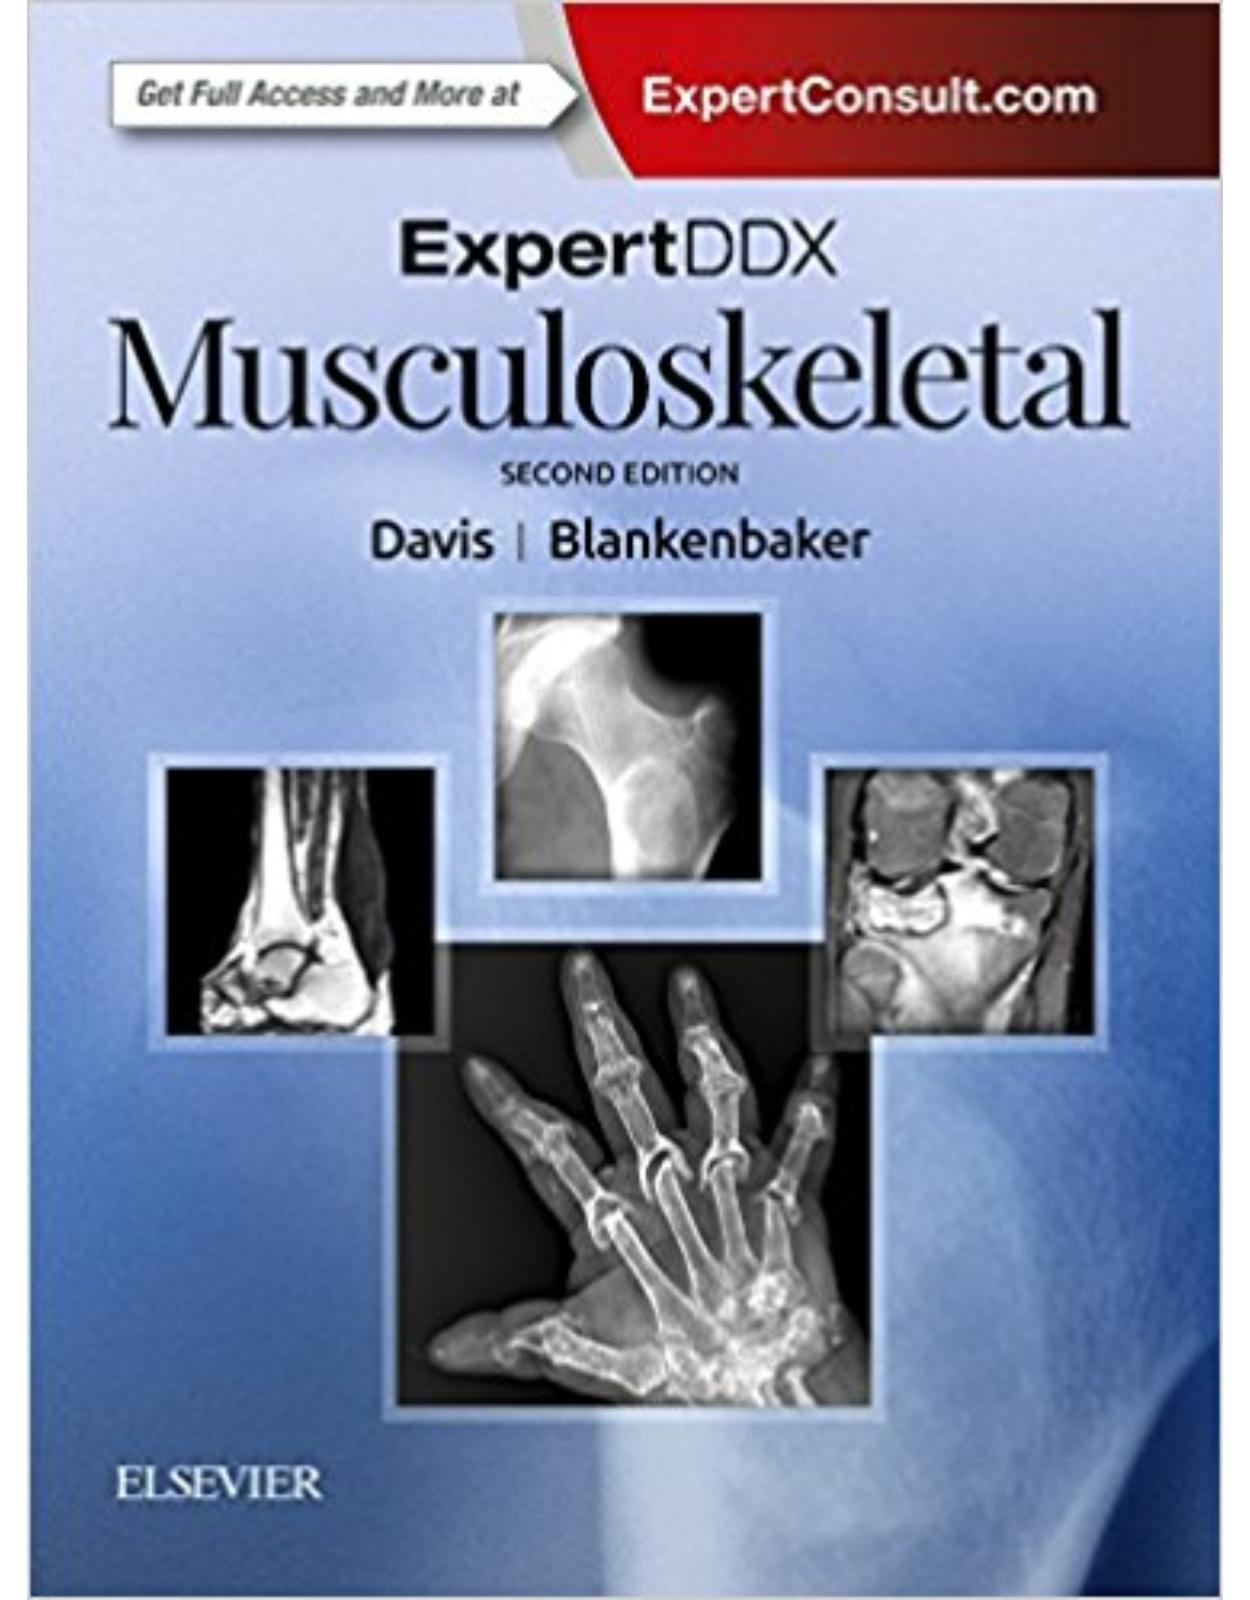 ExpertDDx: Musculoskeletal, 2nd Edition